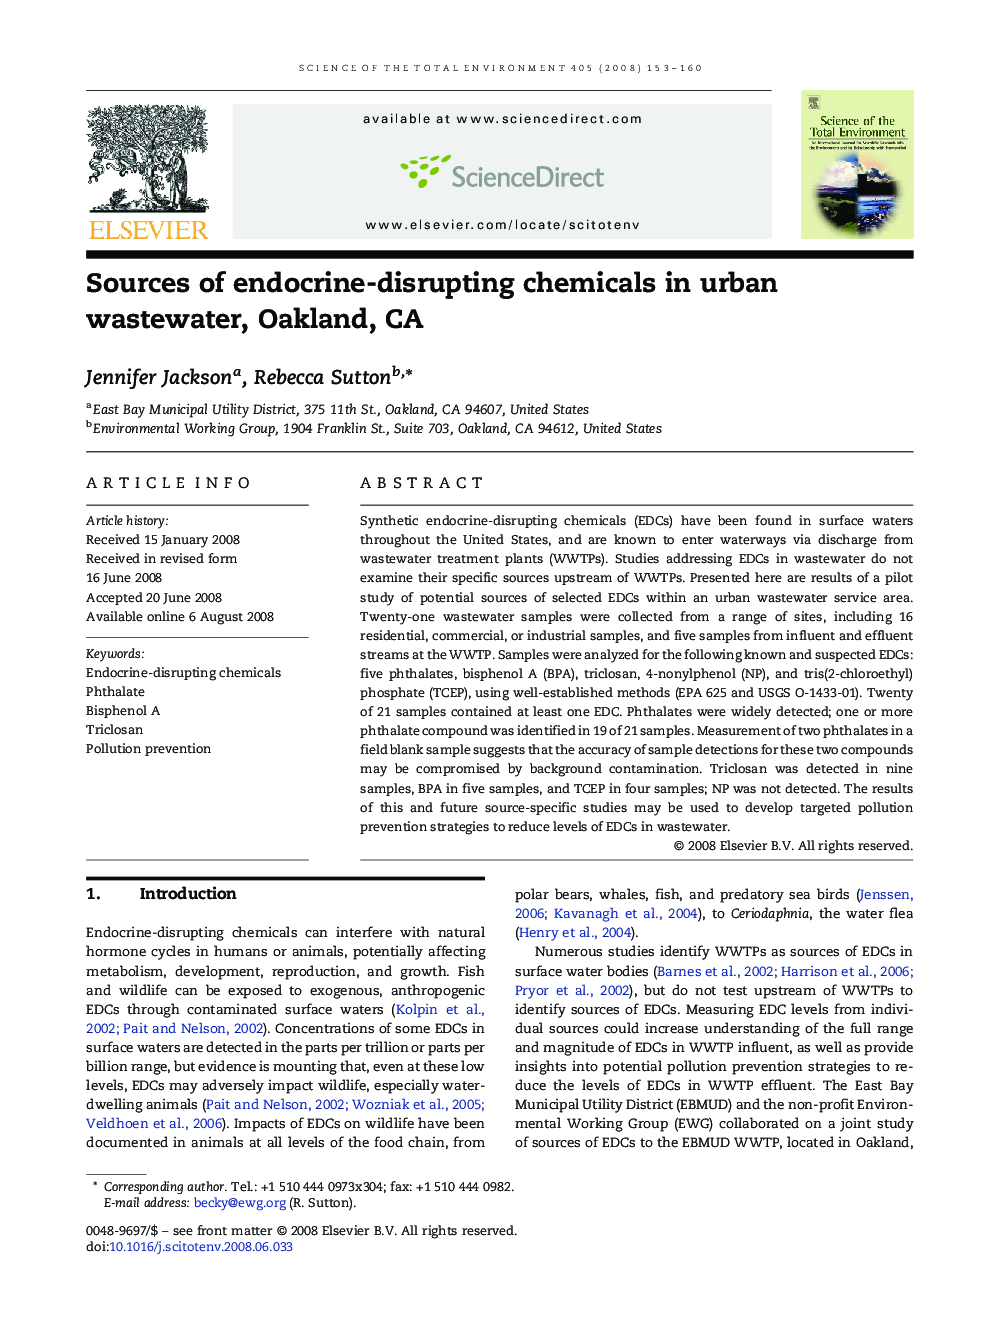 Sources of endocrine-disrupting chemicals in urban wastewater, Oakland, CA